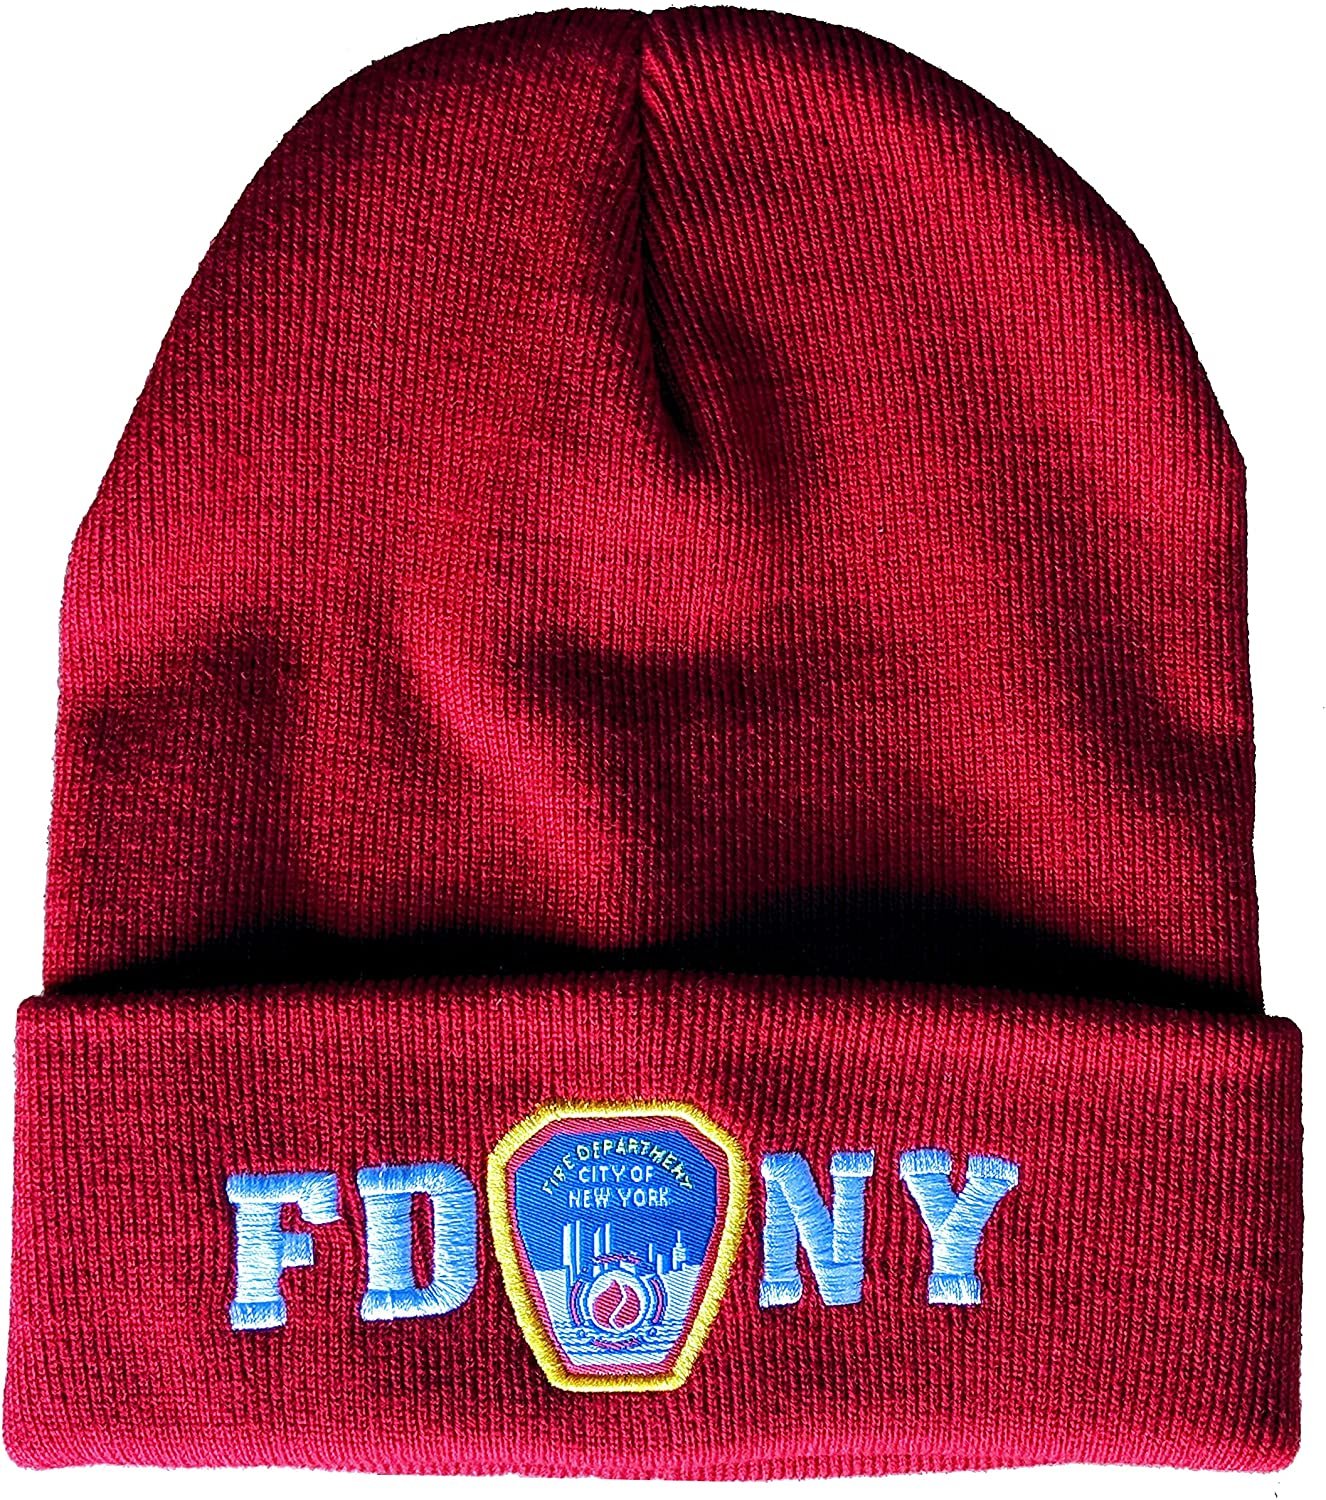 FDNY Beanies Officially Licensed Cold Weather Winter Hats